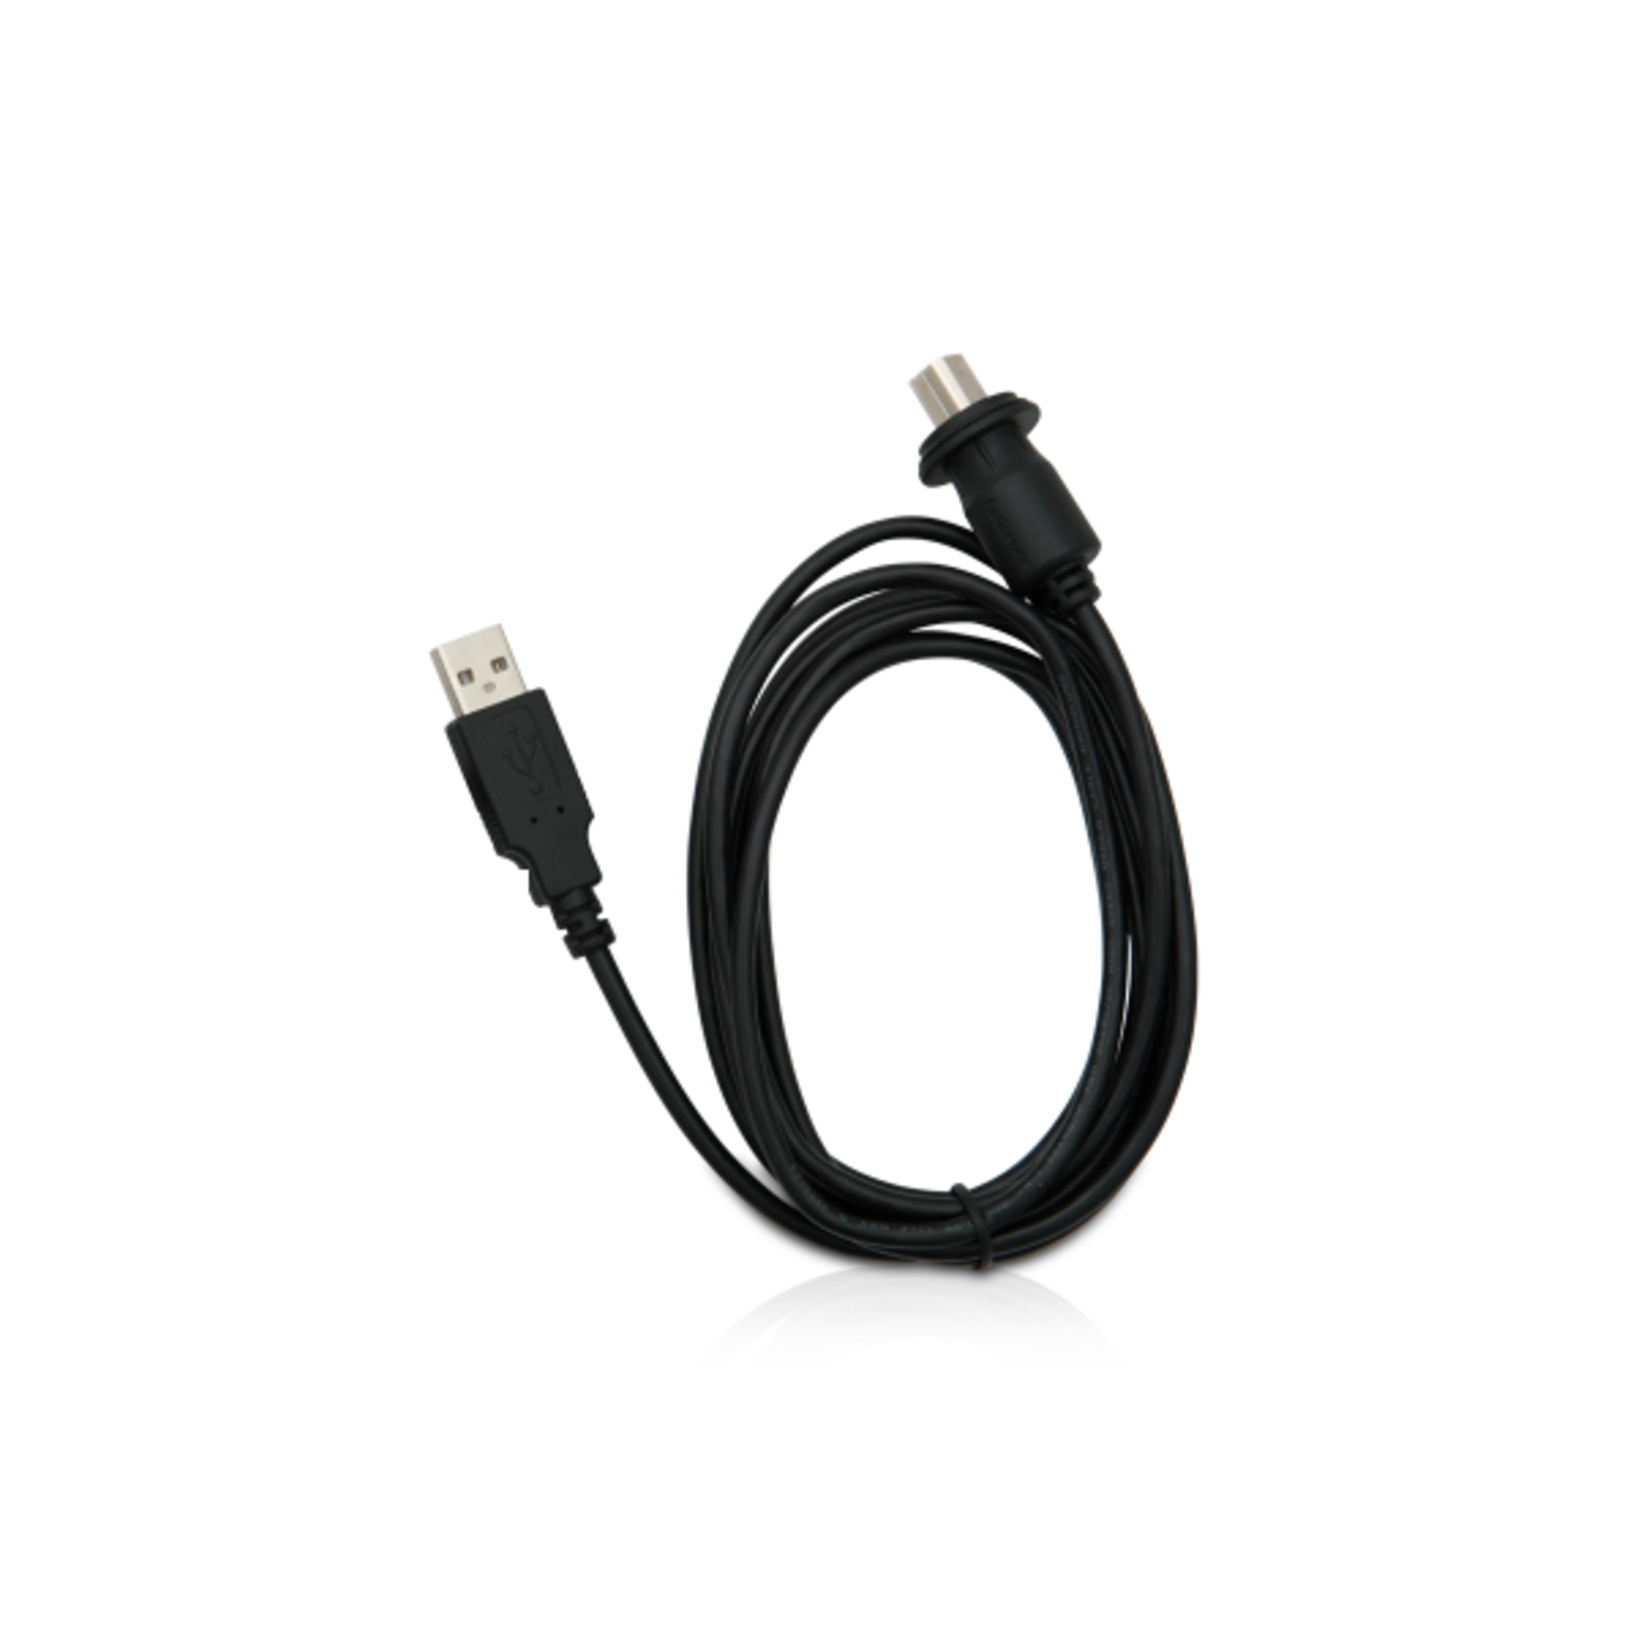 Actisense Spare shielded cable for connecting USG-2 to PC